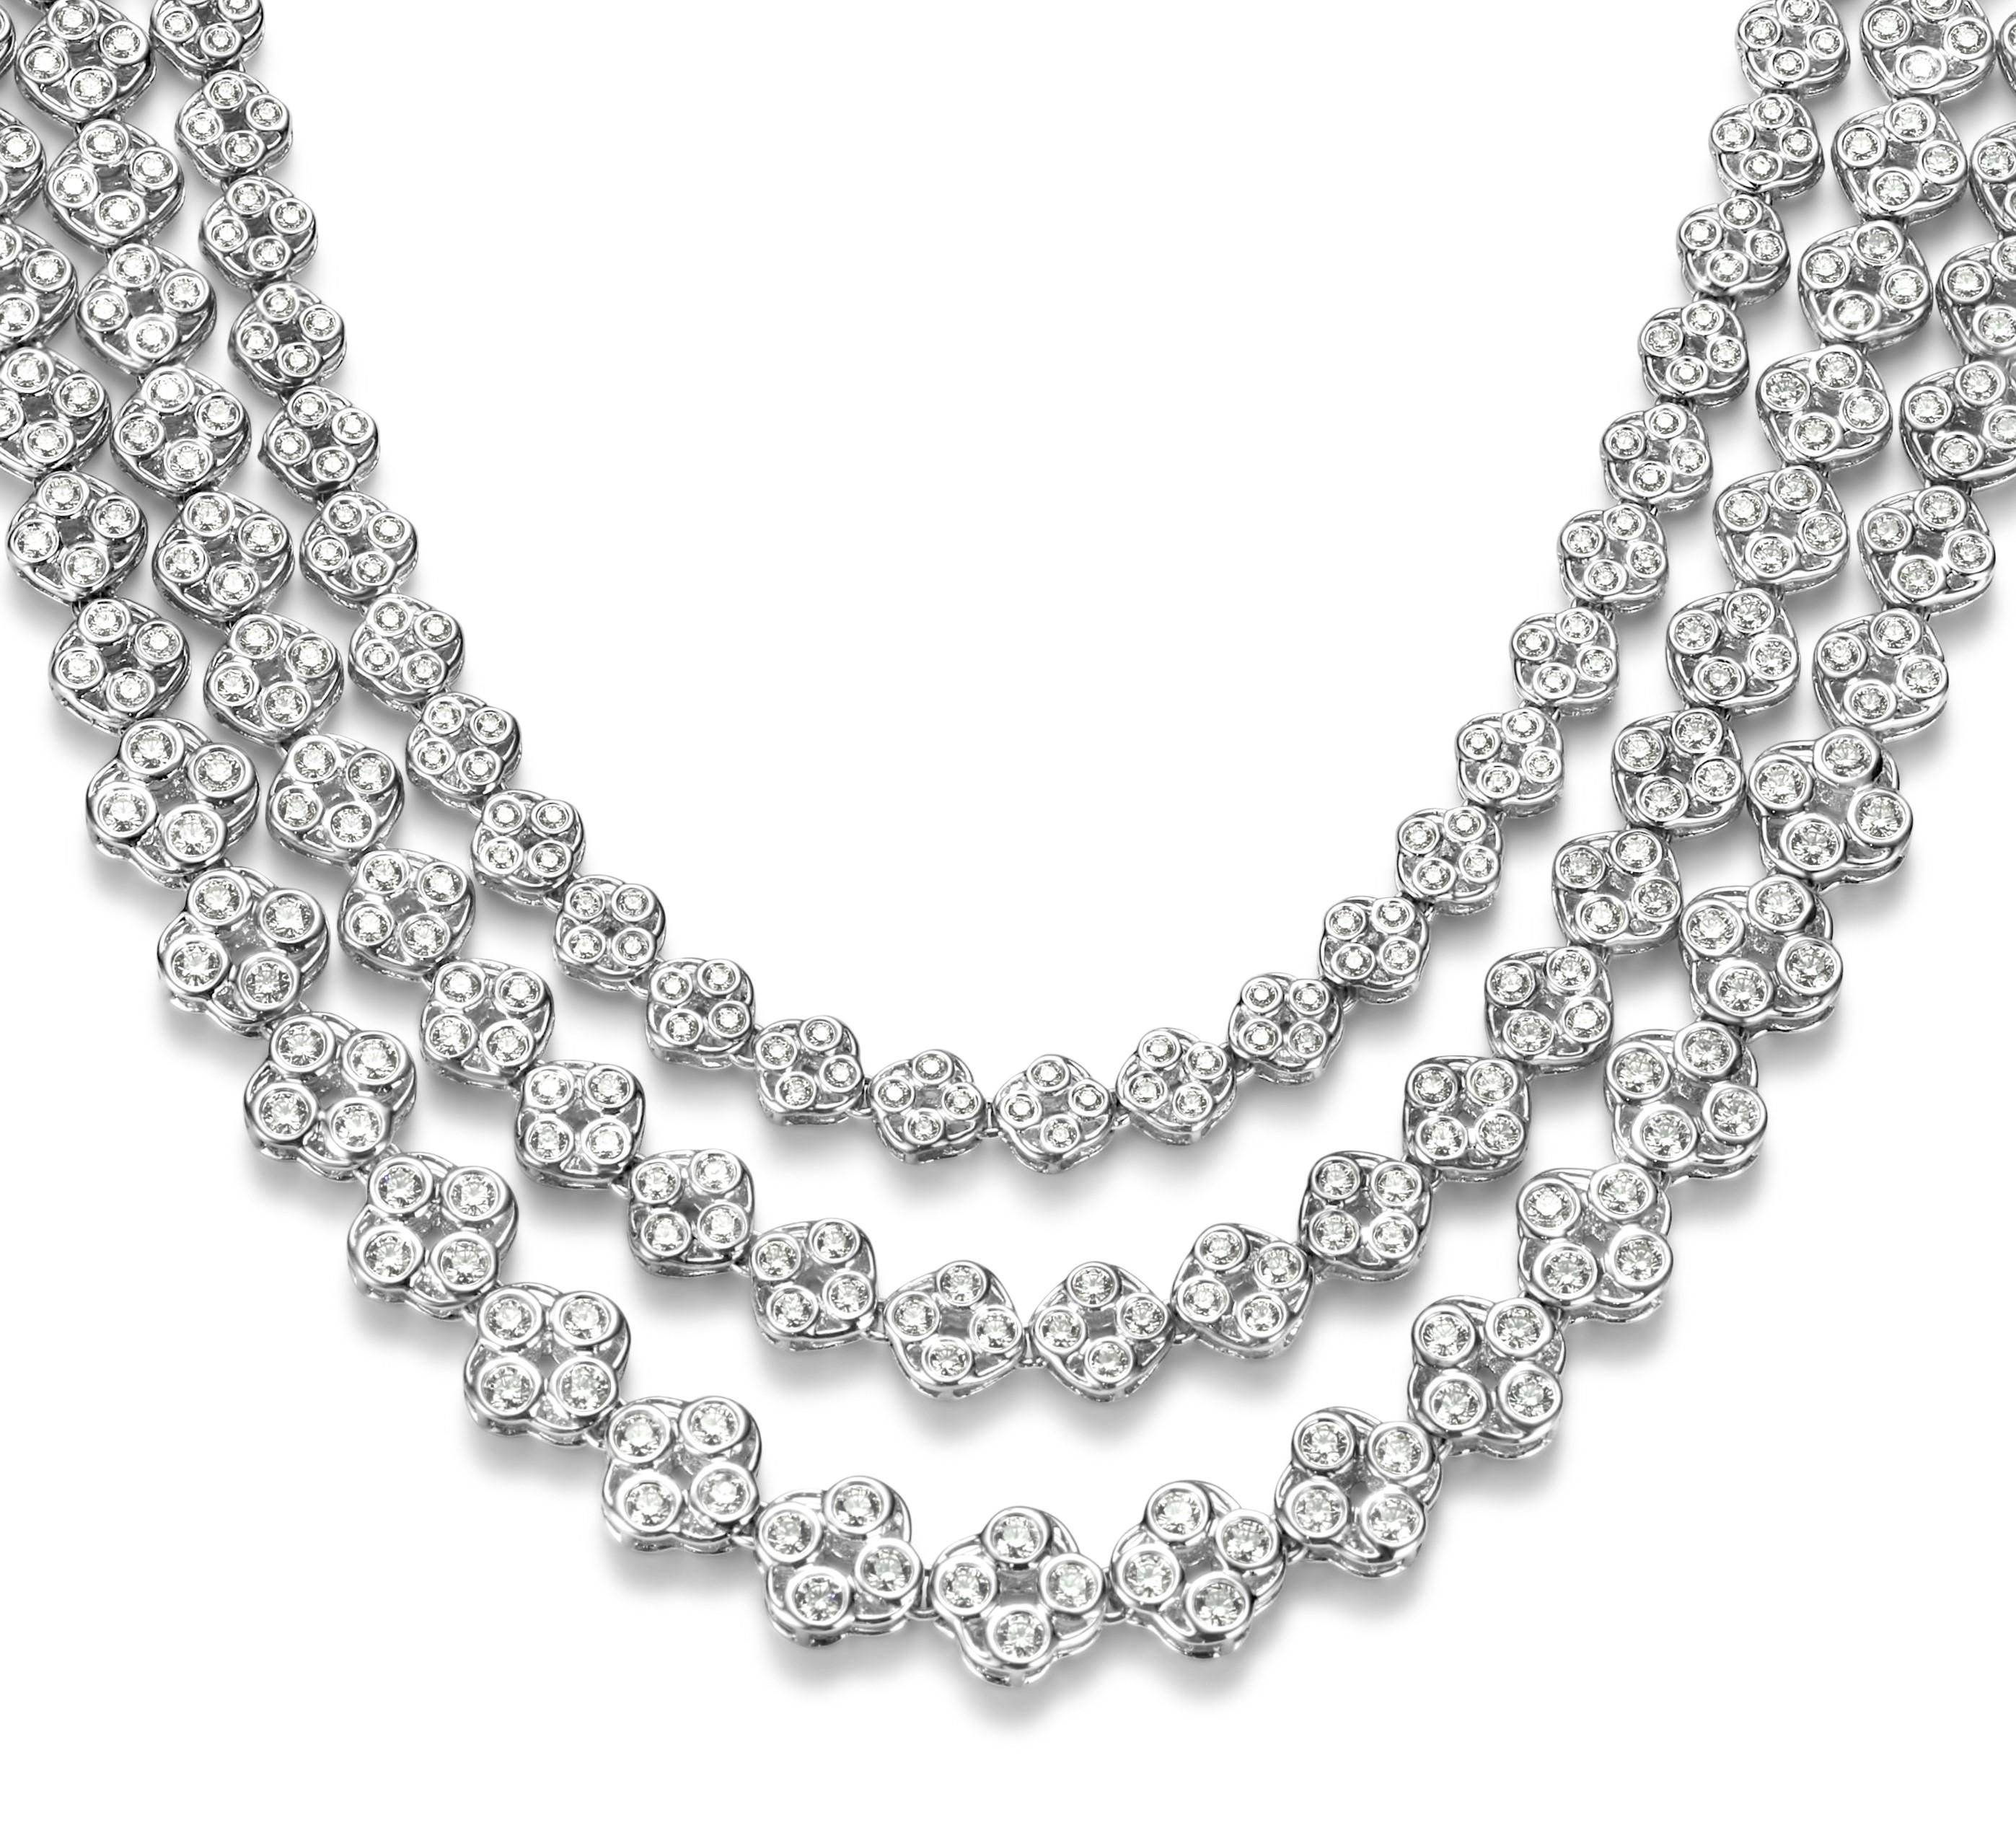 18 kt. White Gold Multi Strand Necklace with 23.48 ct. Brilliant cut Diamonds 
Can be purchased with a gorgeous matching bracelet.

Diamonds: Brilliant cut diamonds together approx. 23.48 ct. Top Quality !

Material: 18 kt. white gold

Measurements: